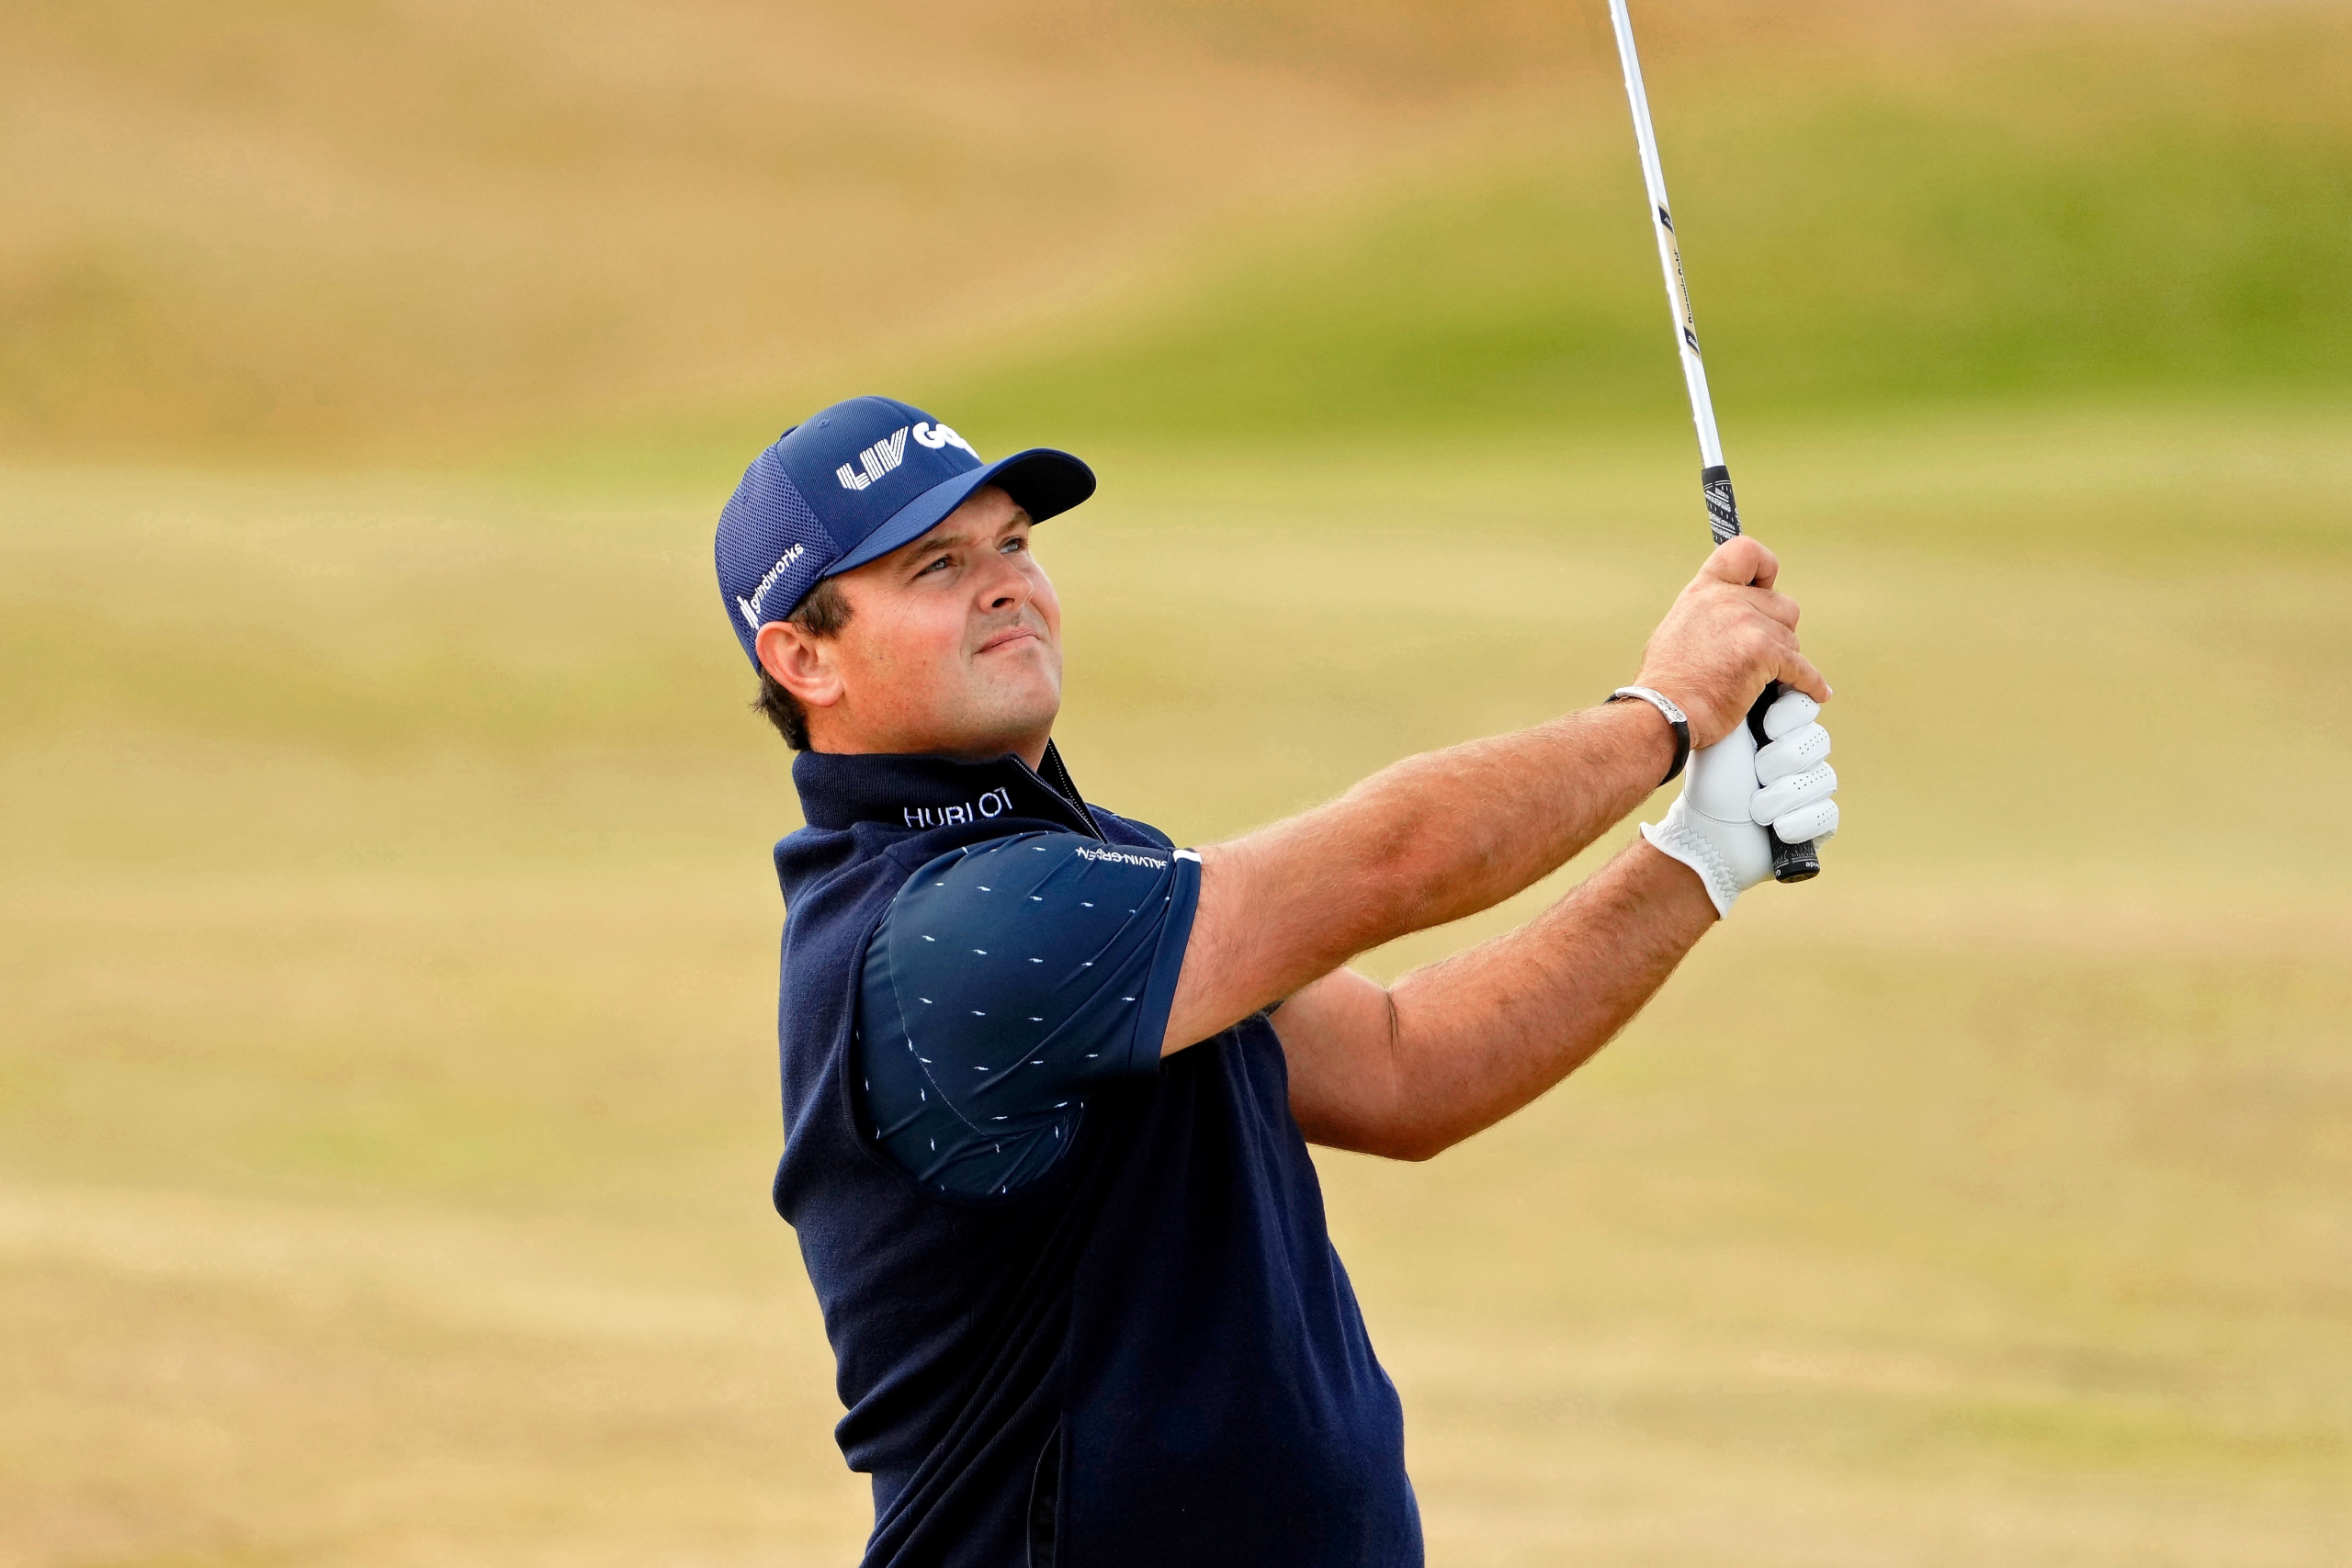 LIV Golfer Patrick Reed claims PGA Tour and Golf channel conspired to defame him